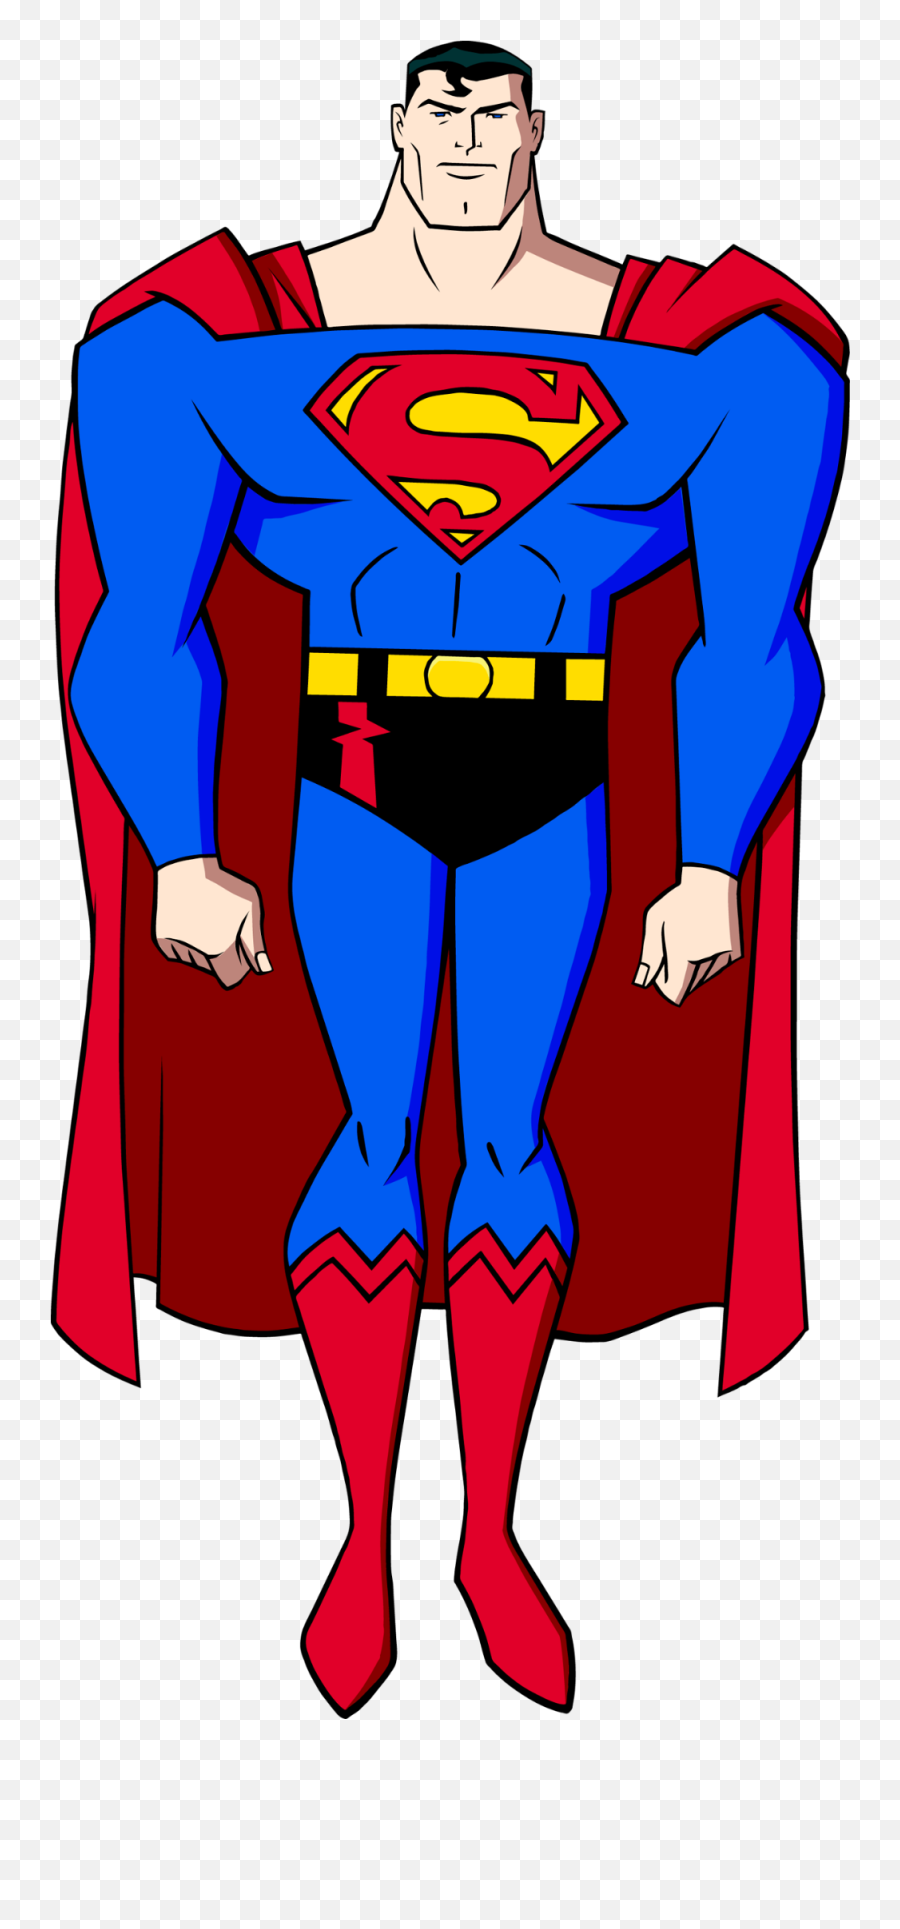 Download 2100k Free Clipart On Omaha Superman Justice - Clip Art Superman Emoji,Justice Emoji Stuff